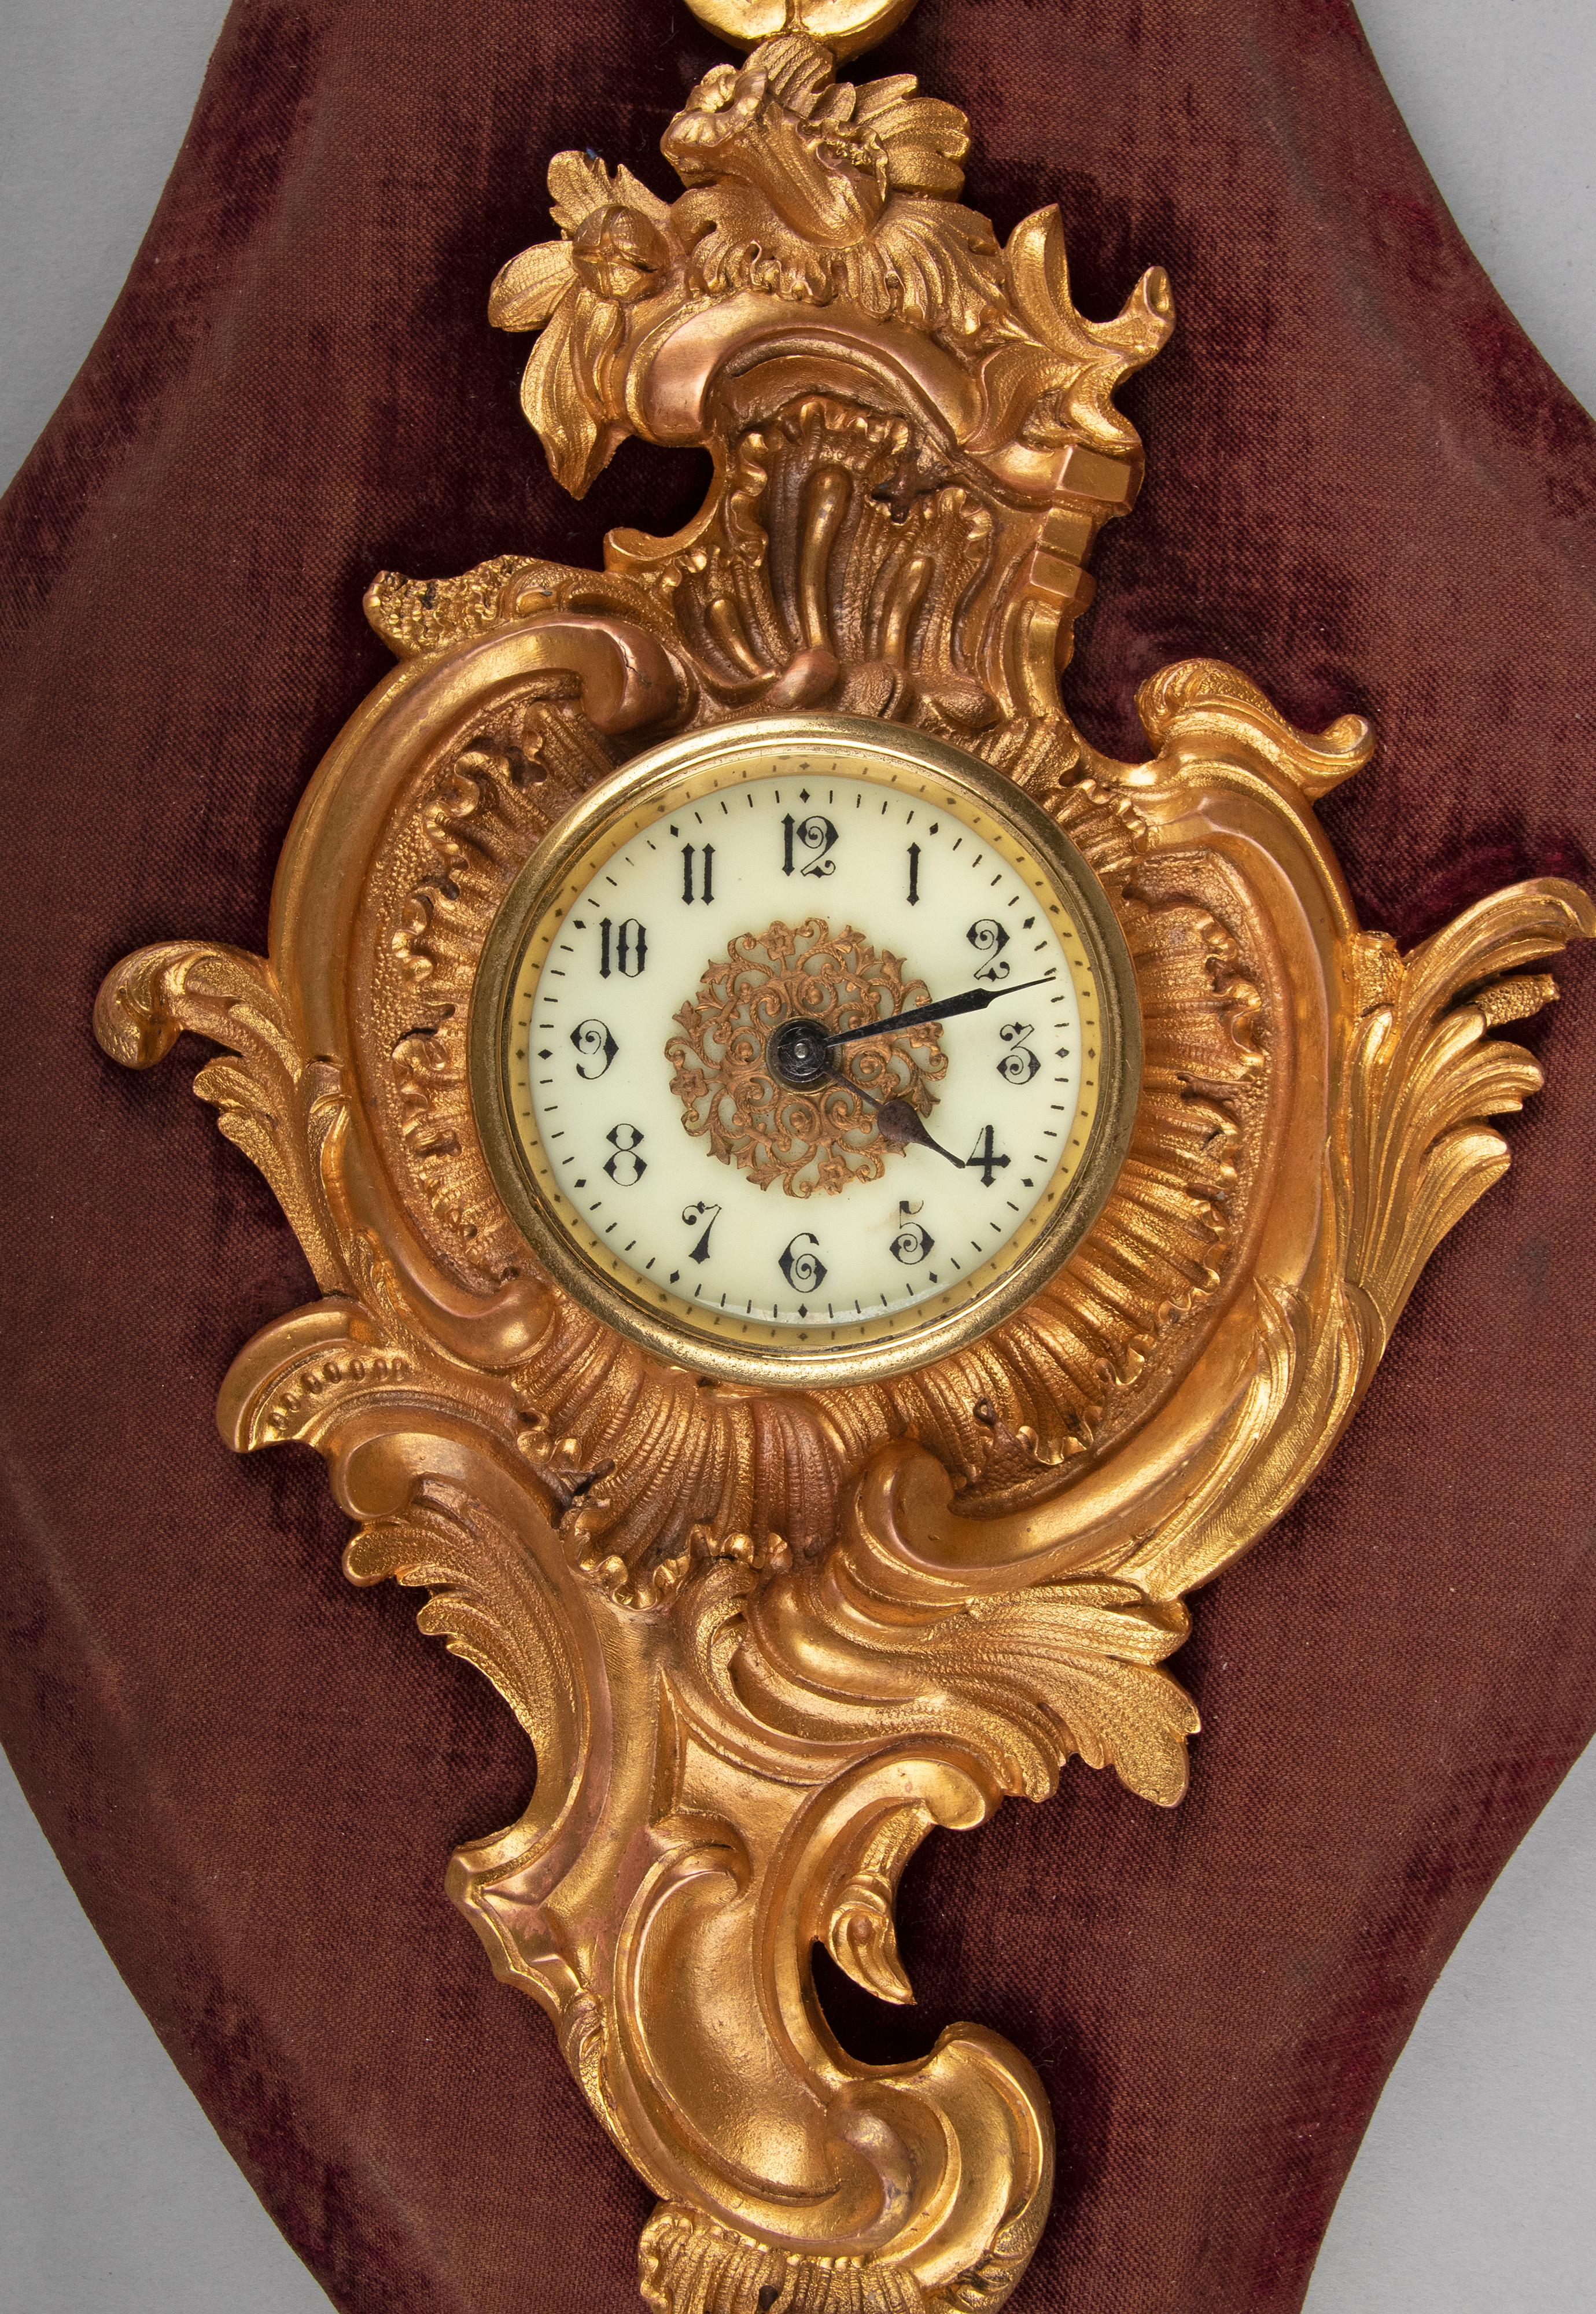 A small and elegant antique cartel clock, mounted on a wooden base with fabric. The richly decorated clock is made of bronze with refined details. Ornated with Louis XV style Rococo scrolls. The dial is made of enameled copper with Arabic numbers.